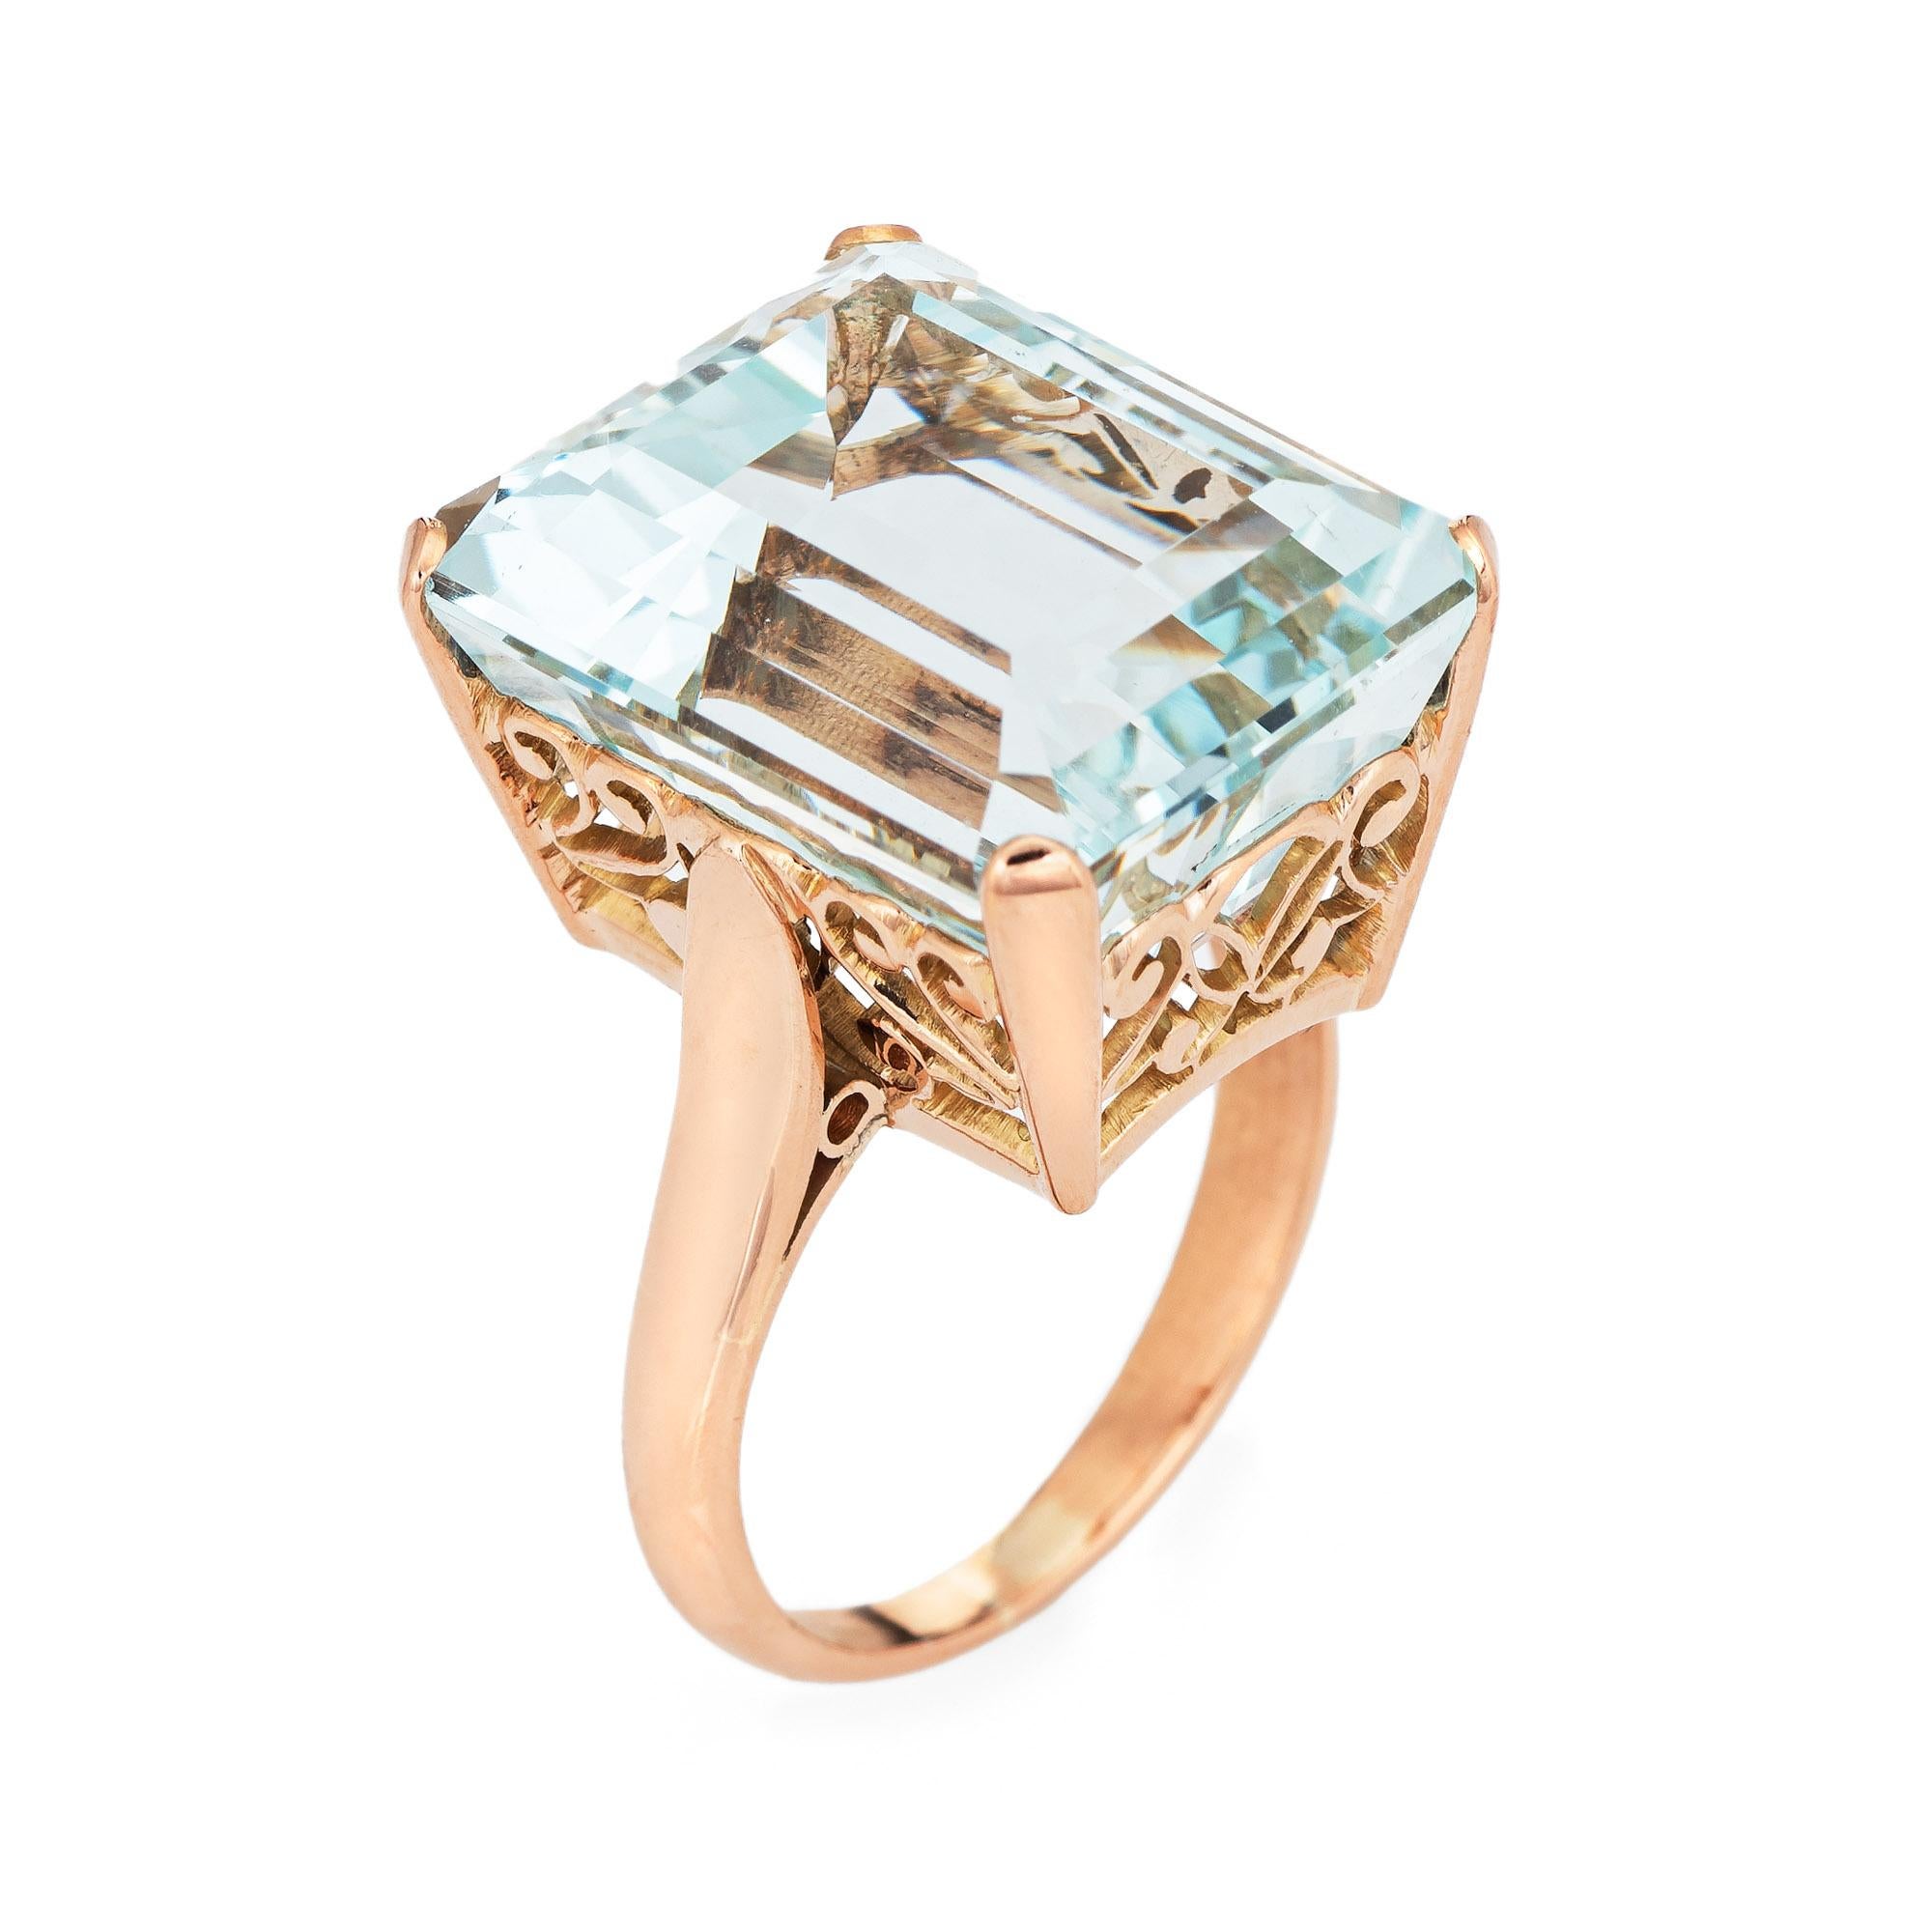 Stylish vintage estimated 20 carat aquamarine cocktail ring (circa 1950s to 1960s) crafted in 14 karat yellow gold. 

Emerald cut aquamarine measures 17.4mm x 14.4mm (estimated at 20 carats). The aquamarine is in very good condition and free of